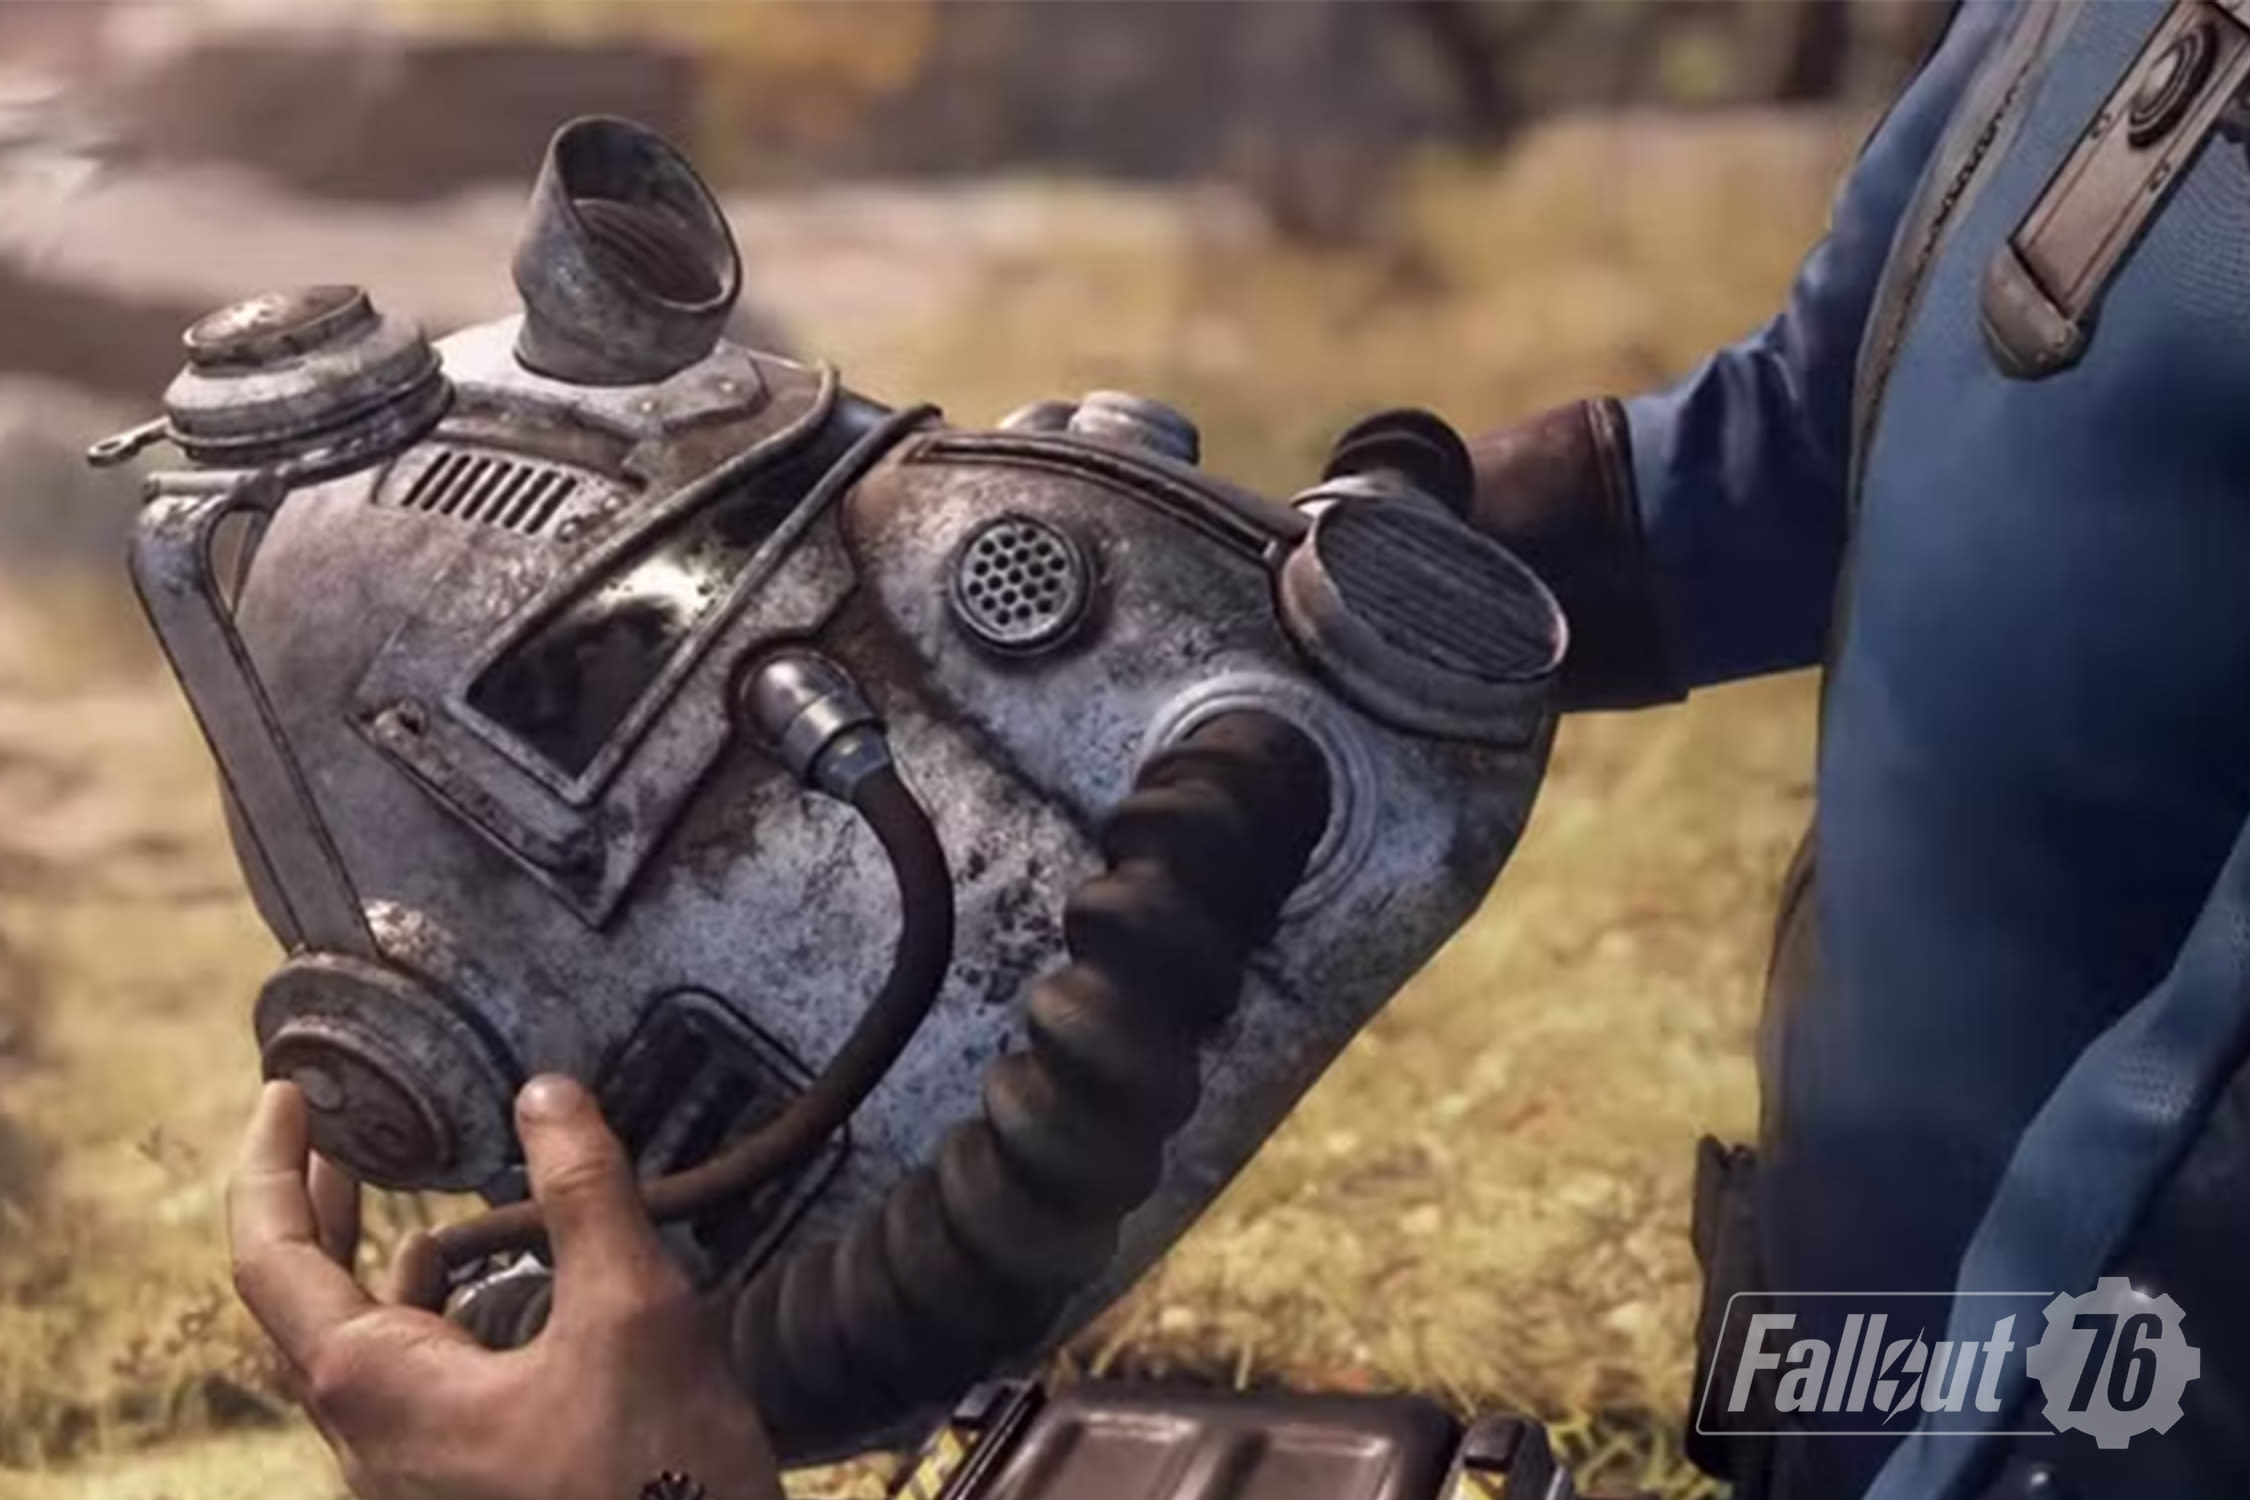 Write your epic post apocalyptic story with Fallout 76 and save $63